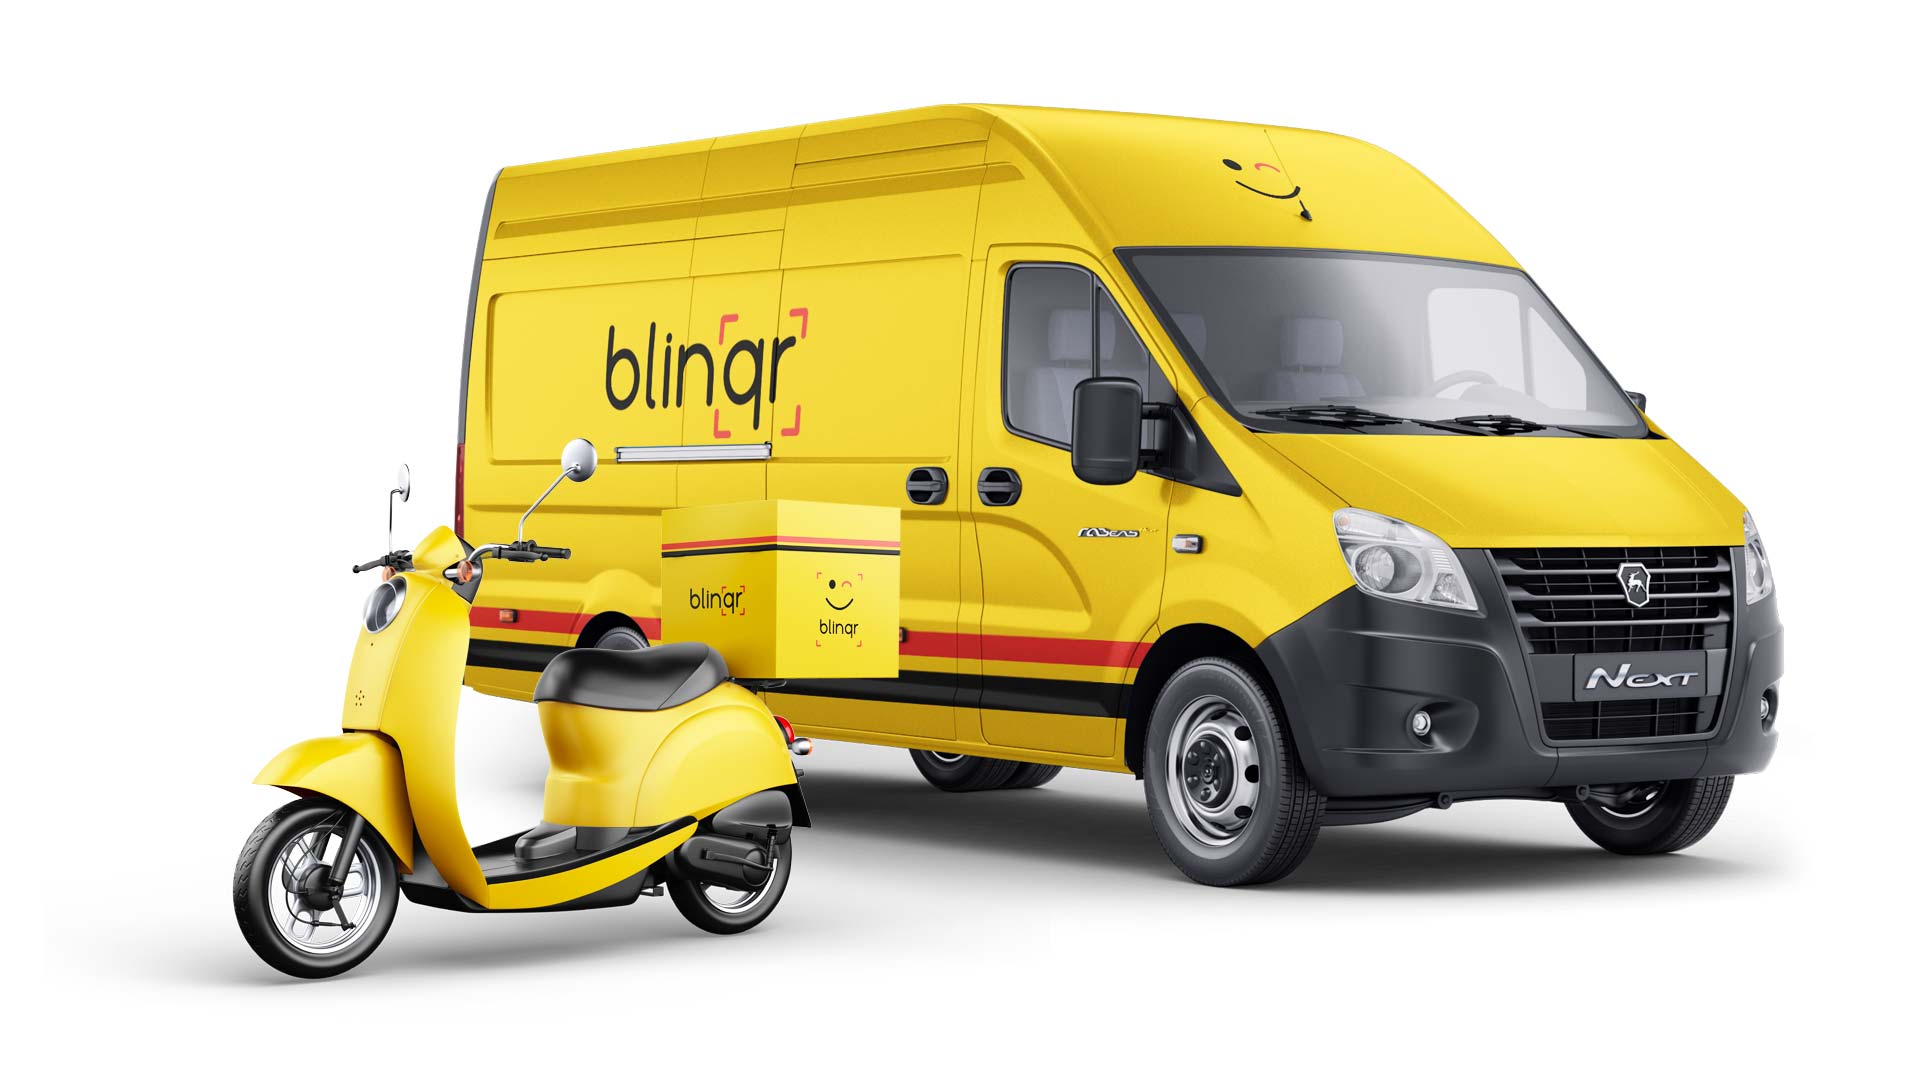 Blinqr Truck and Scooter